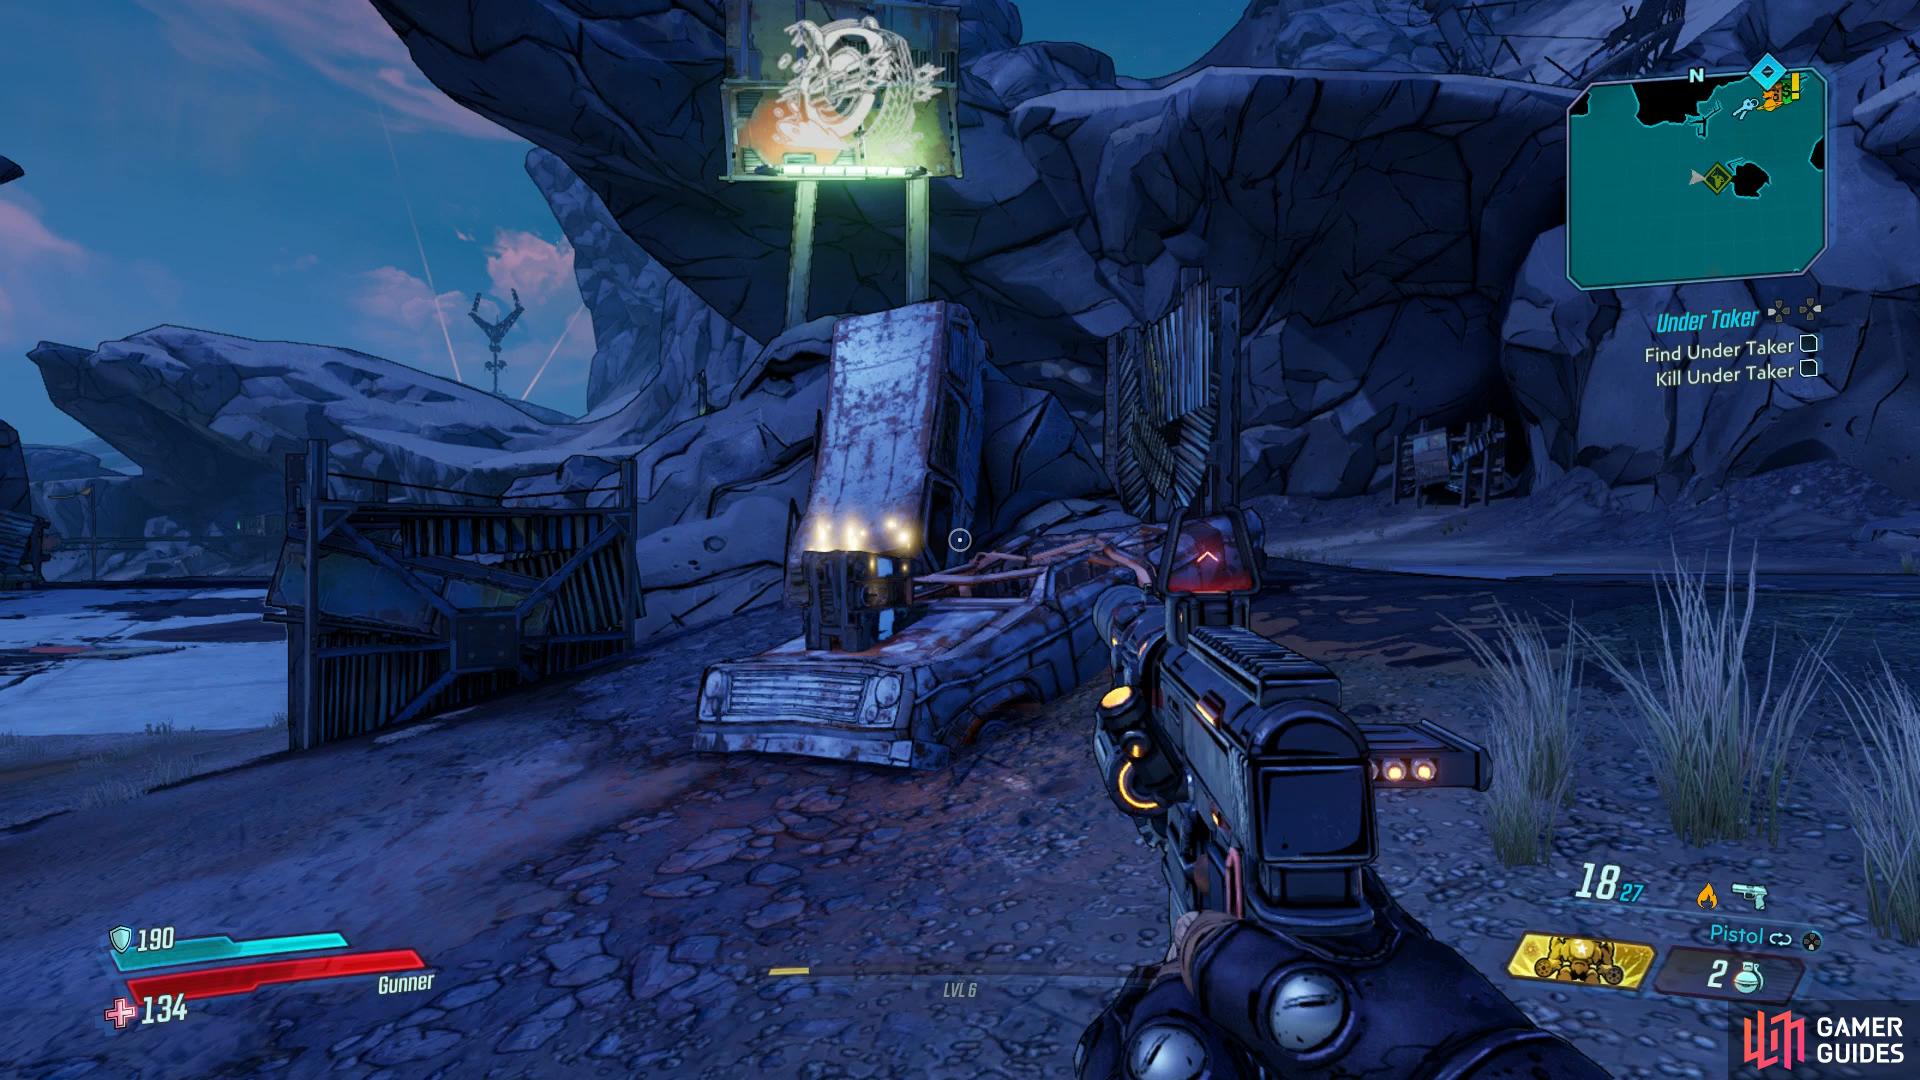 Be sure to nab the parts from the Dead Claptrap outside the service stop.